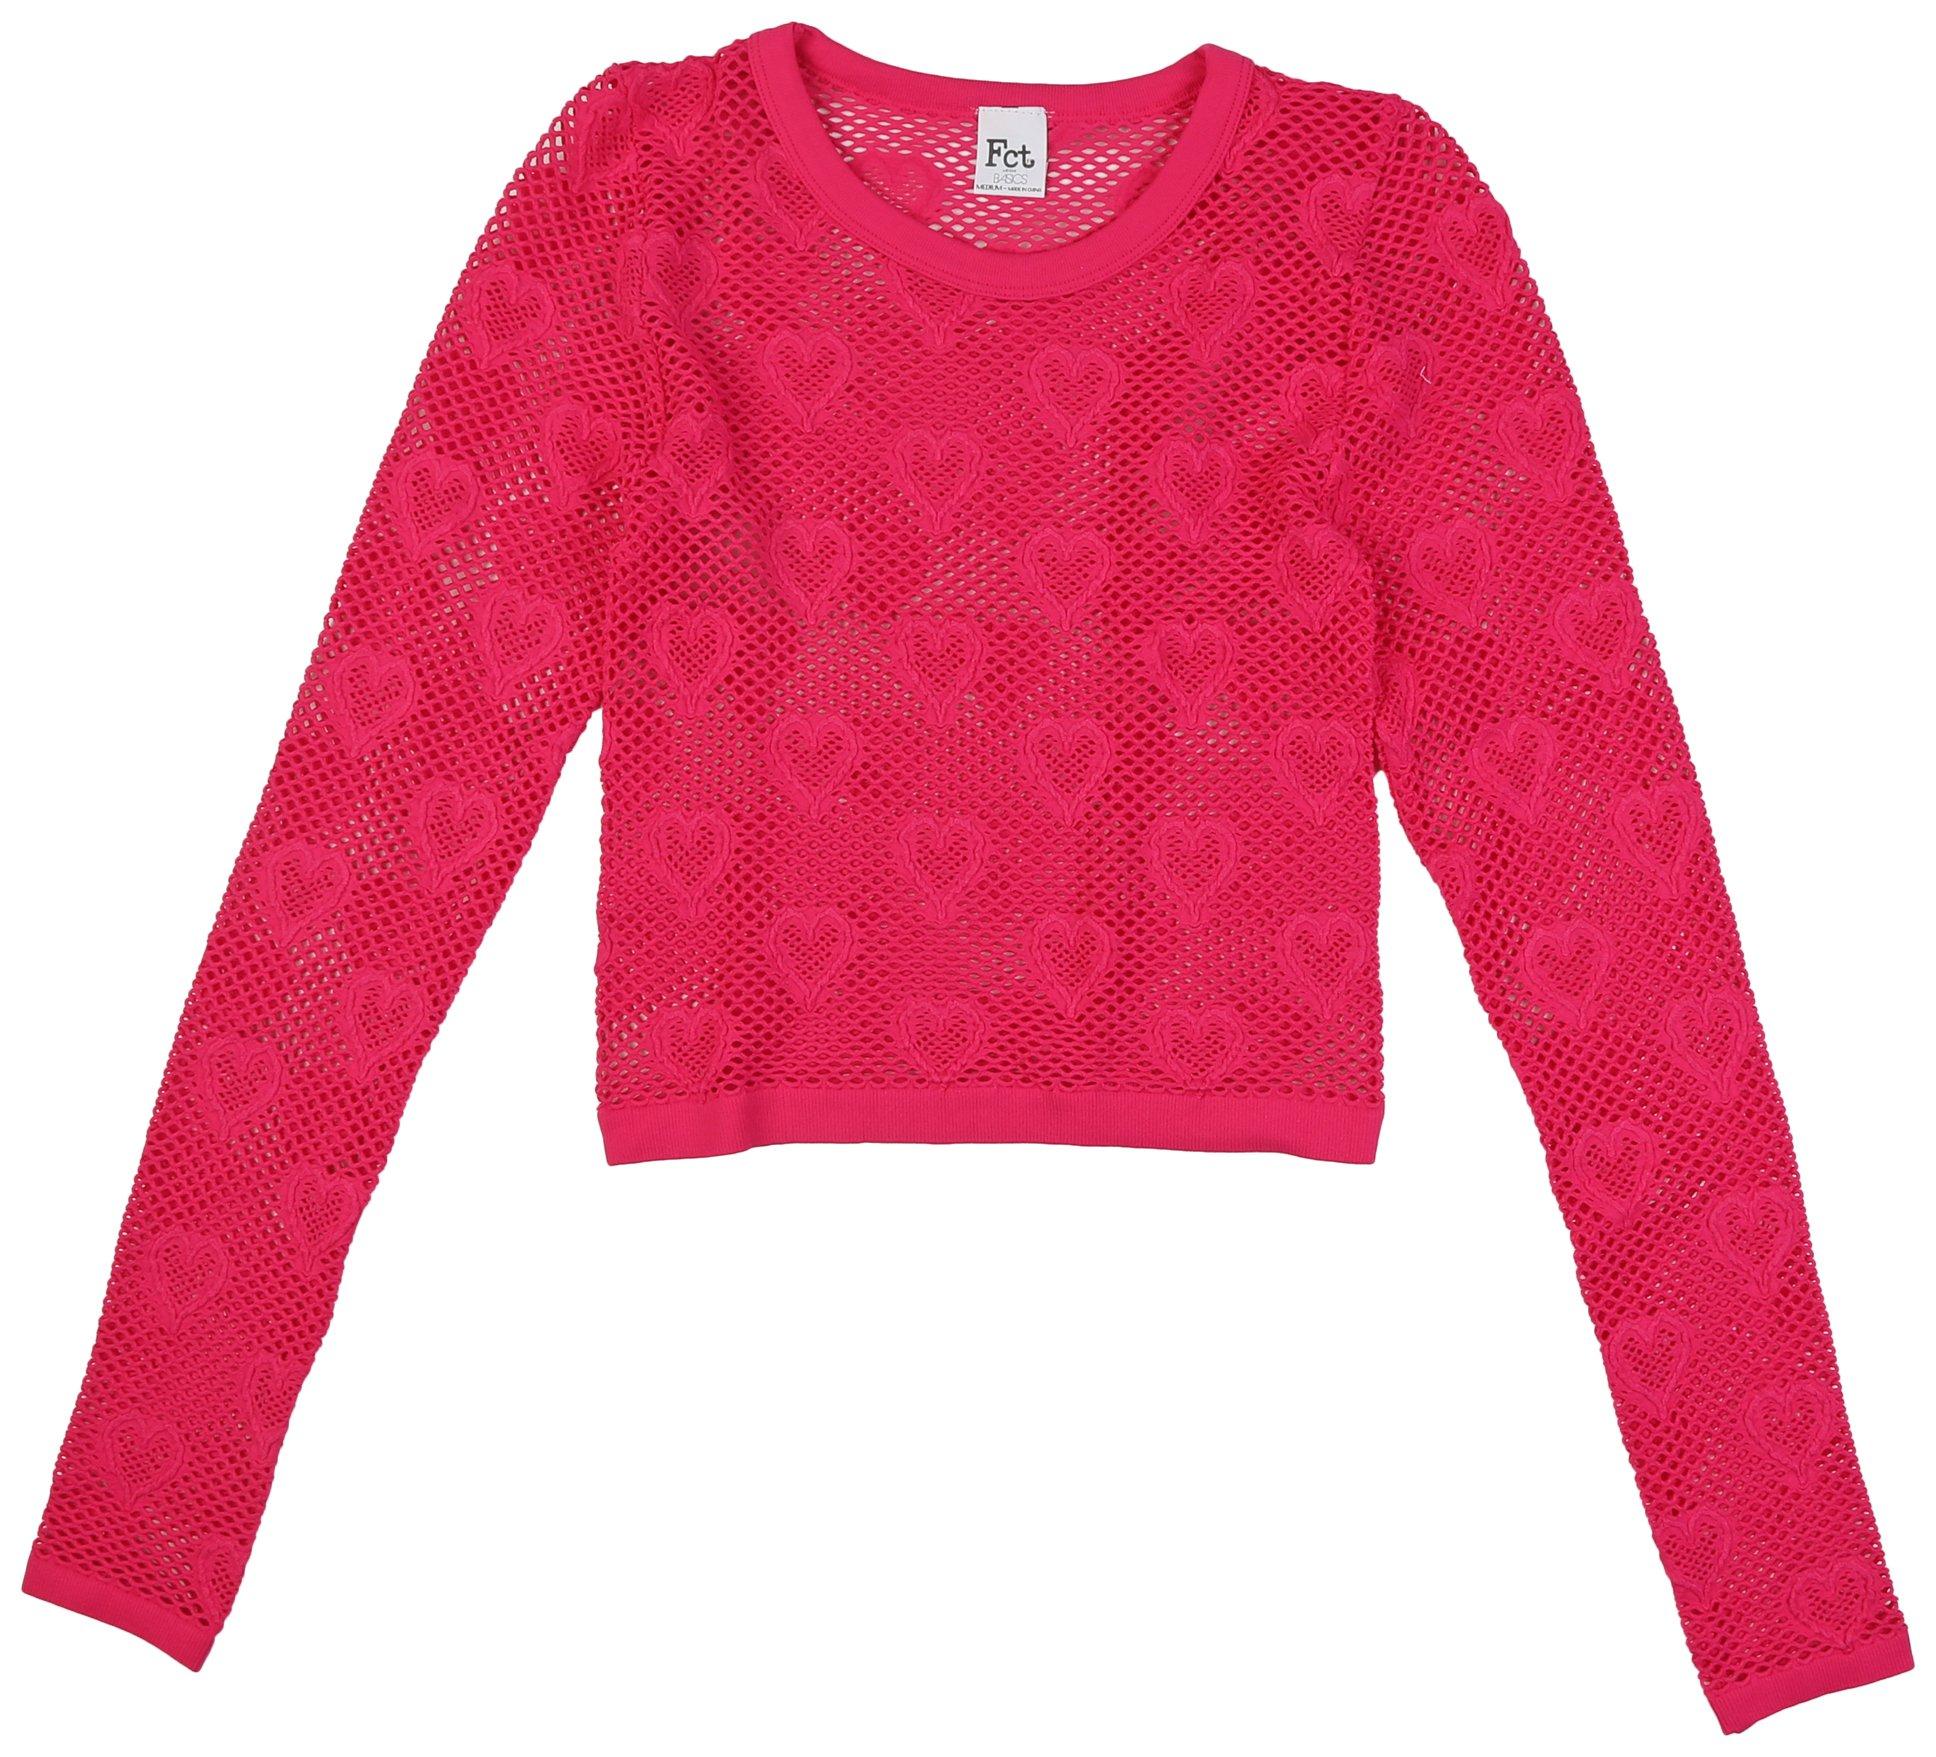 Full Circle Trends Juniors Hearts Open Weave Pullover Top